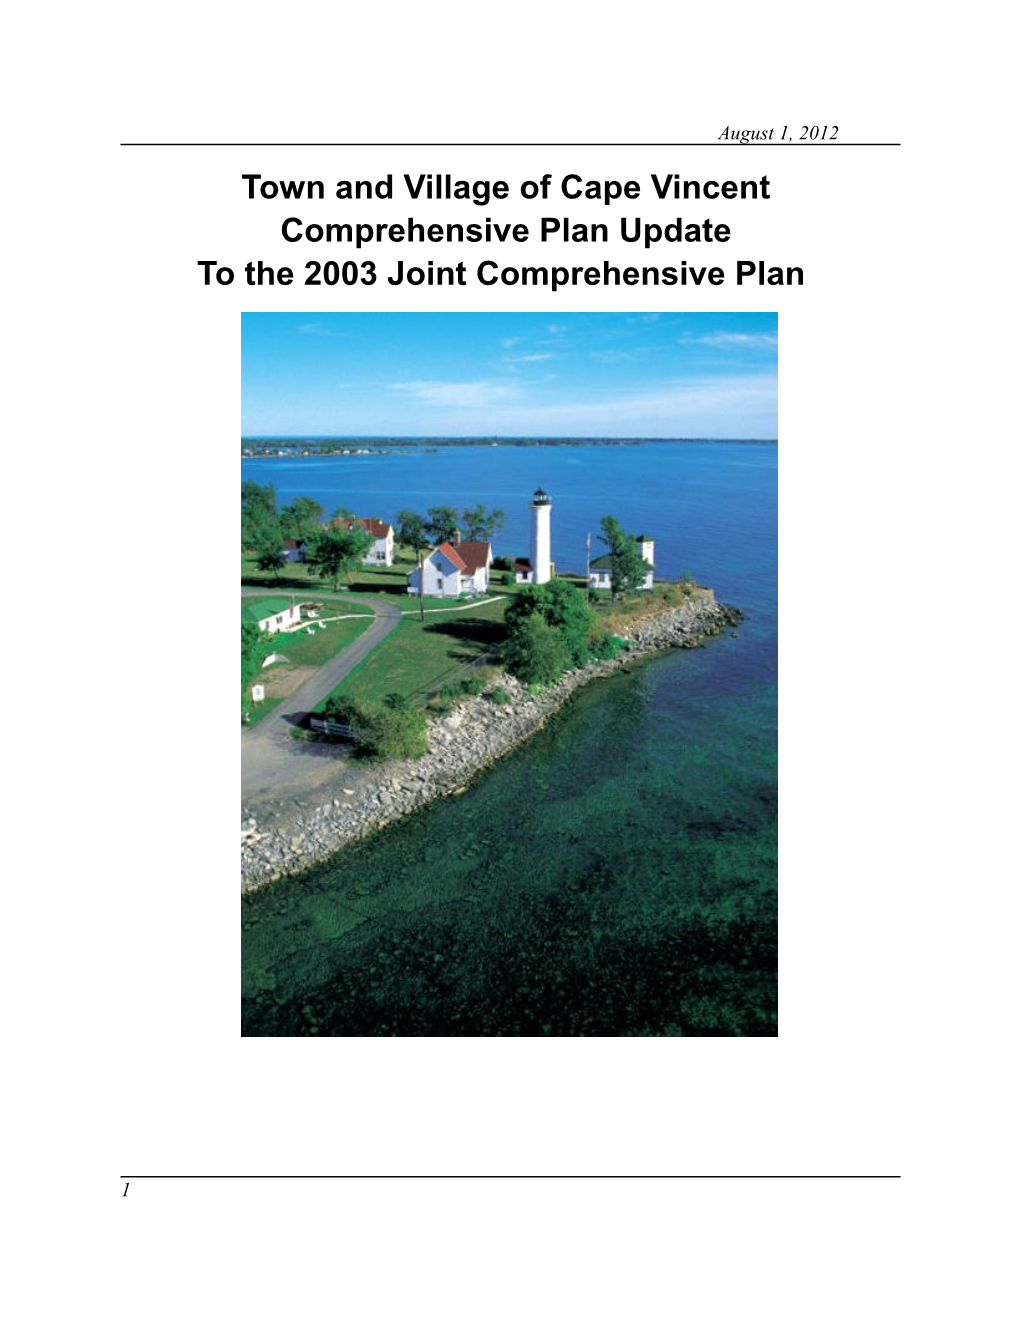 Town and Village of Cape Vincent Comprehensive Plan Update to the 2003 Joint Comprehensive Plan